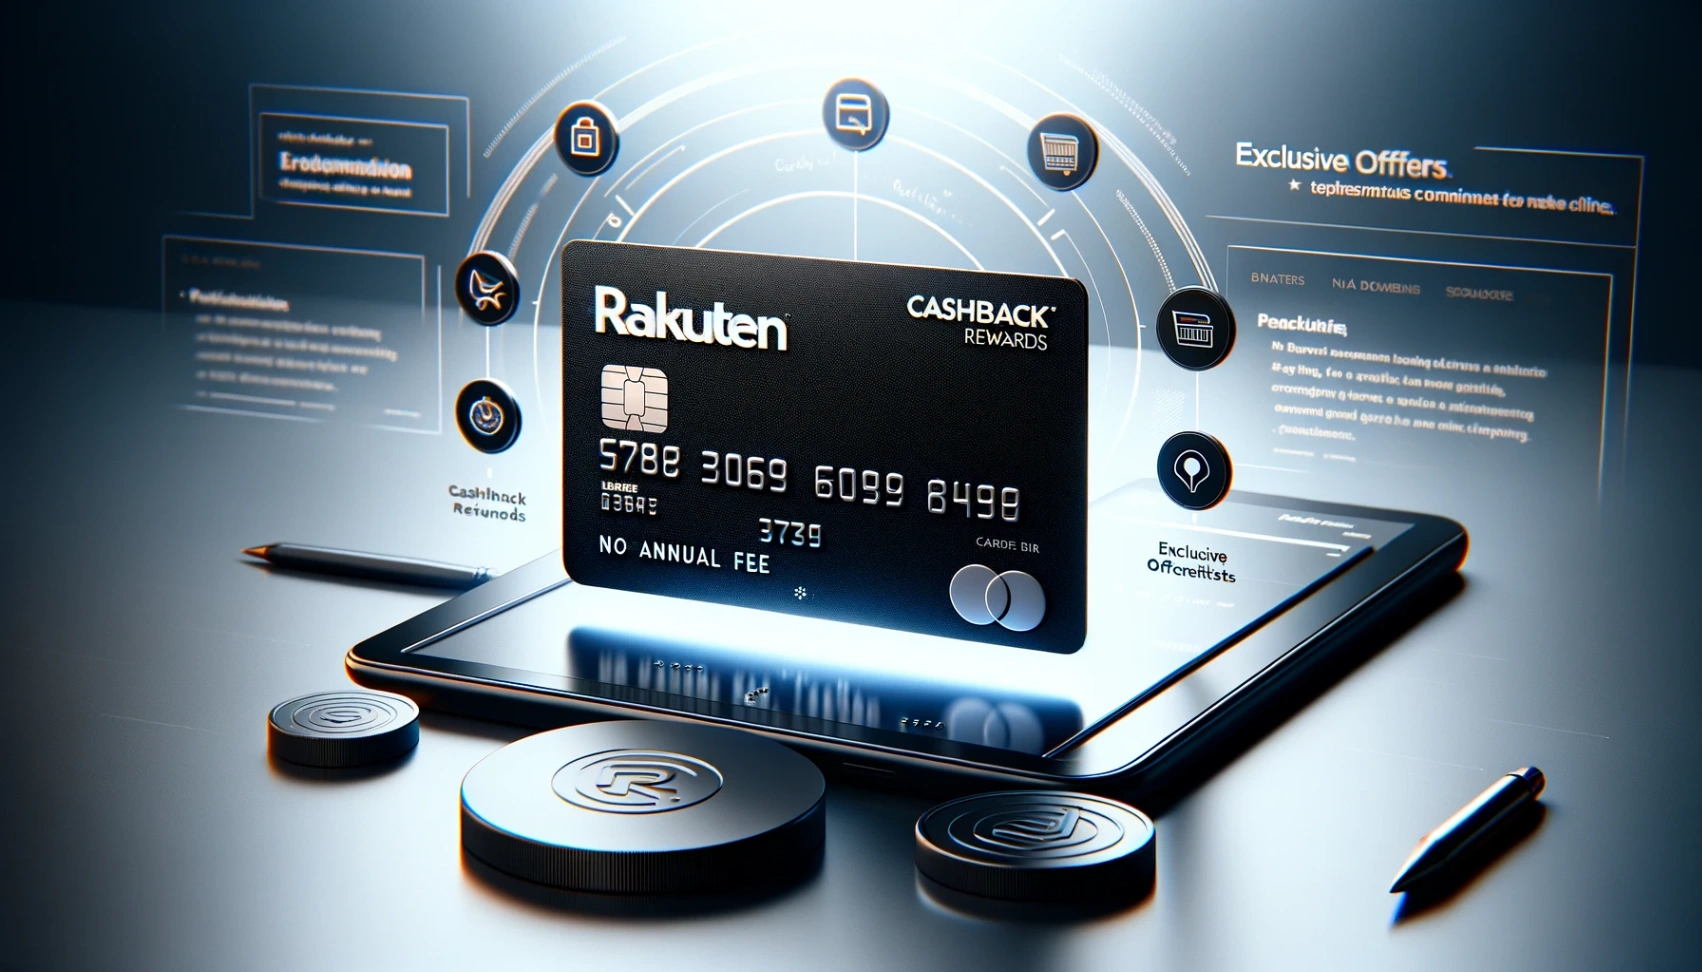 Learn How to Apply for the Rakuten Credit Card